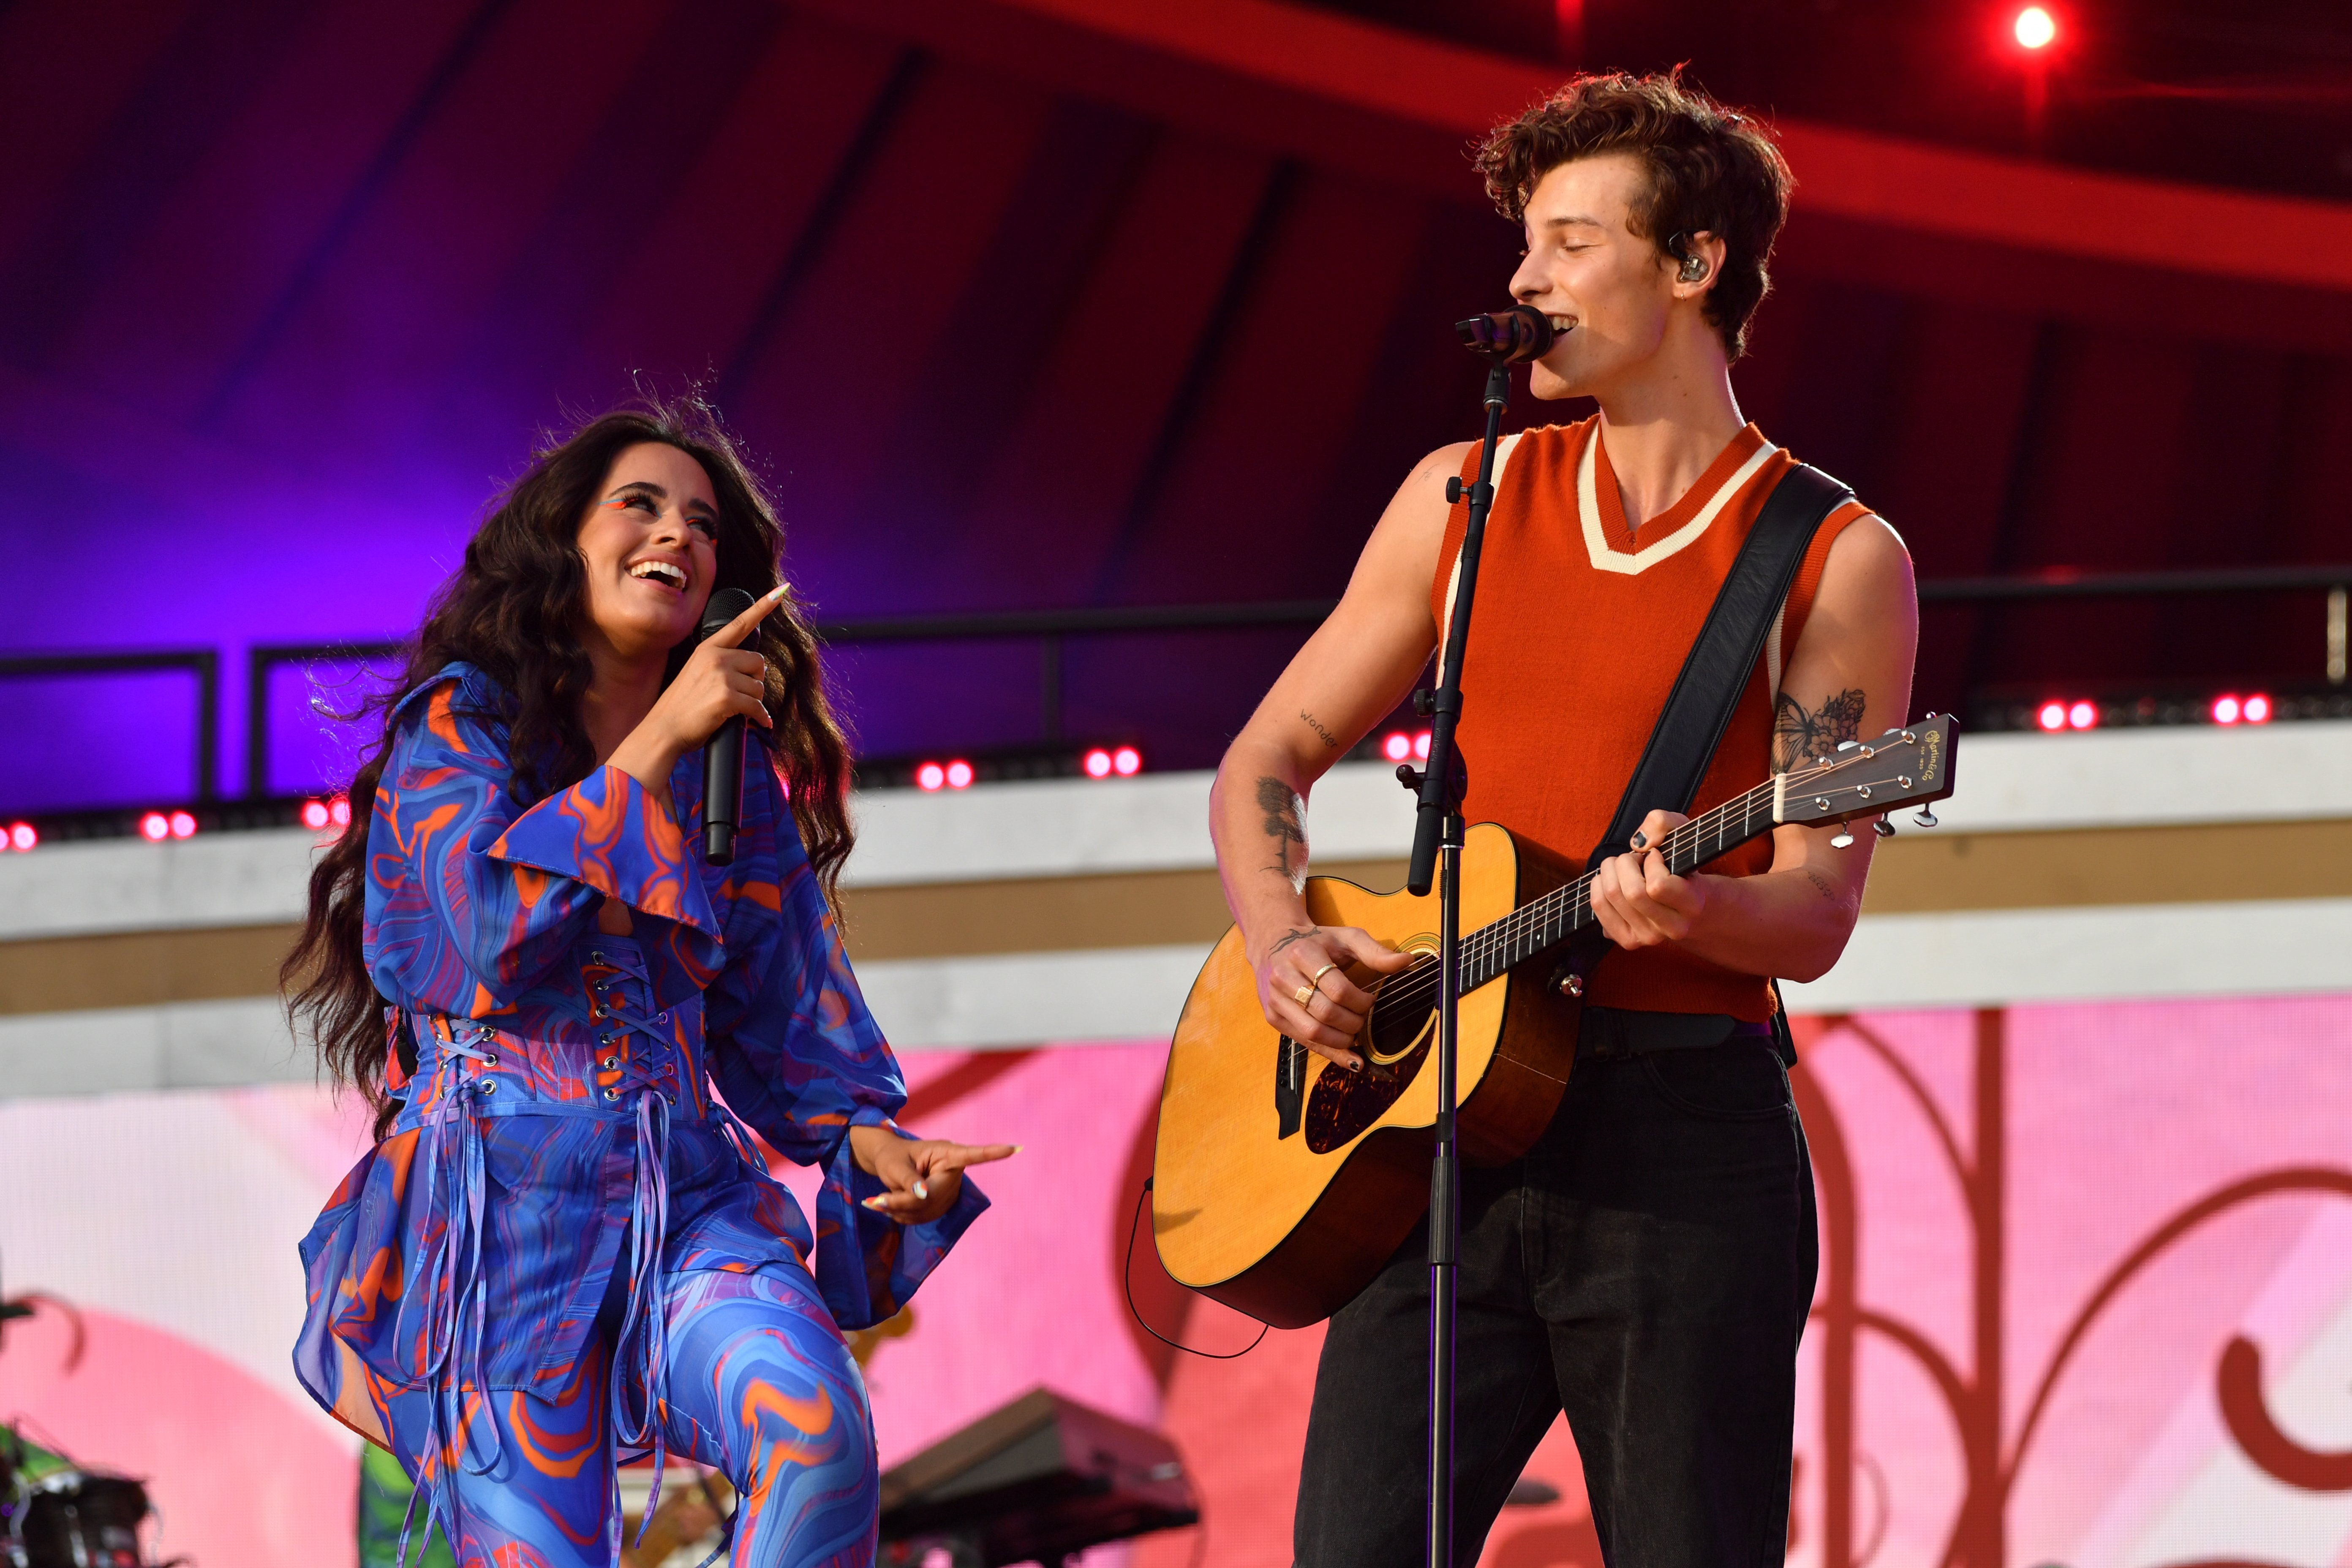 Camila Cabello and Shawn Mendes at Global Citizen Live on September 25, 2021 in New York City. | Source: Getty Images